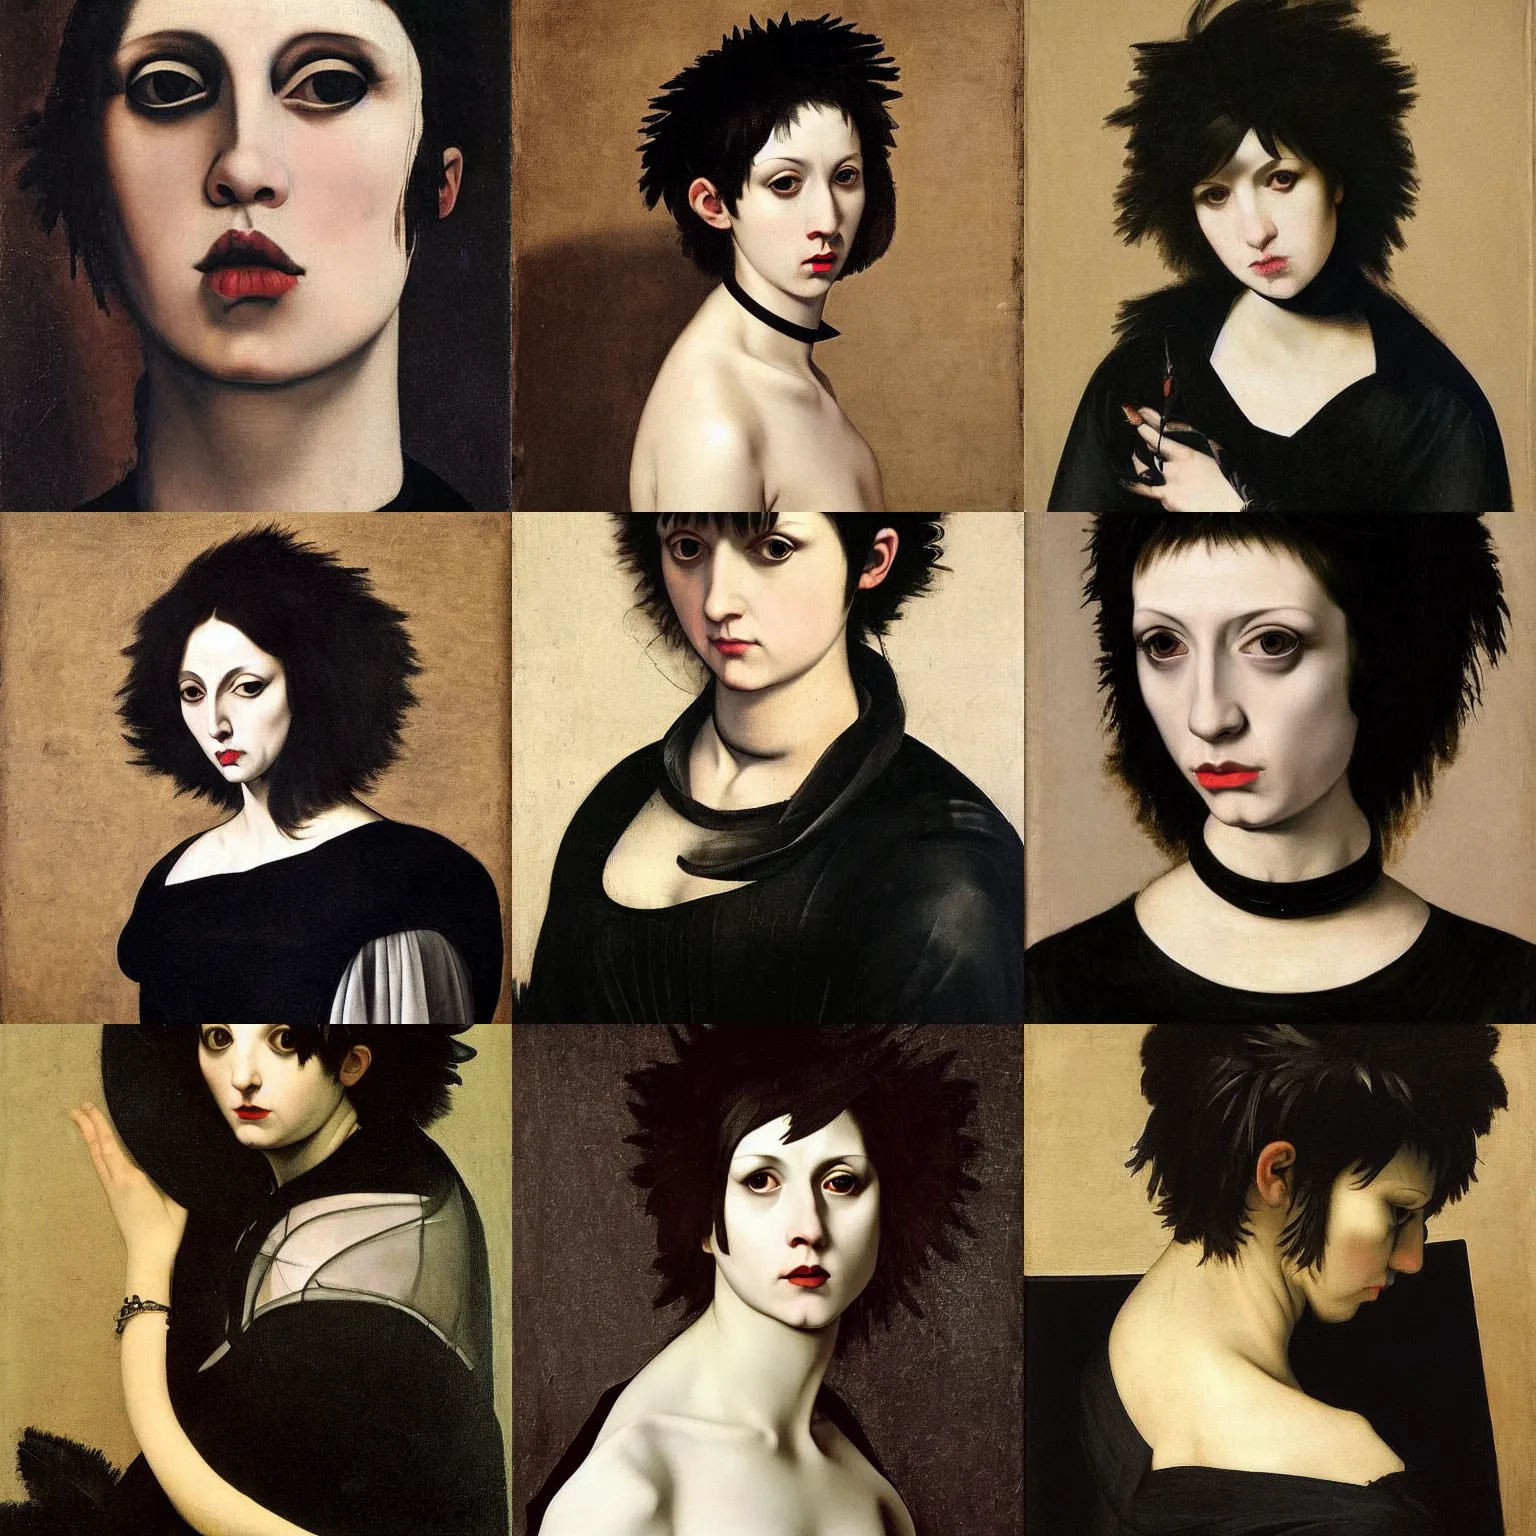 Prompt: A goth painted by Caravaggio. Her hair is dark brown and cut into a short, messy pixie cut. She has a slightly rounded face, with a pointed chin, large entirely-black eyes, and a small nose. She is wearing a black tank top, a black leather jacket, a black knee-length skirt, a black choker, and black leather boots.